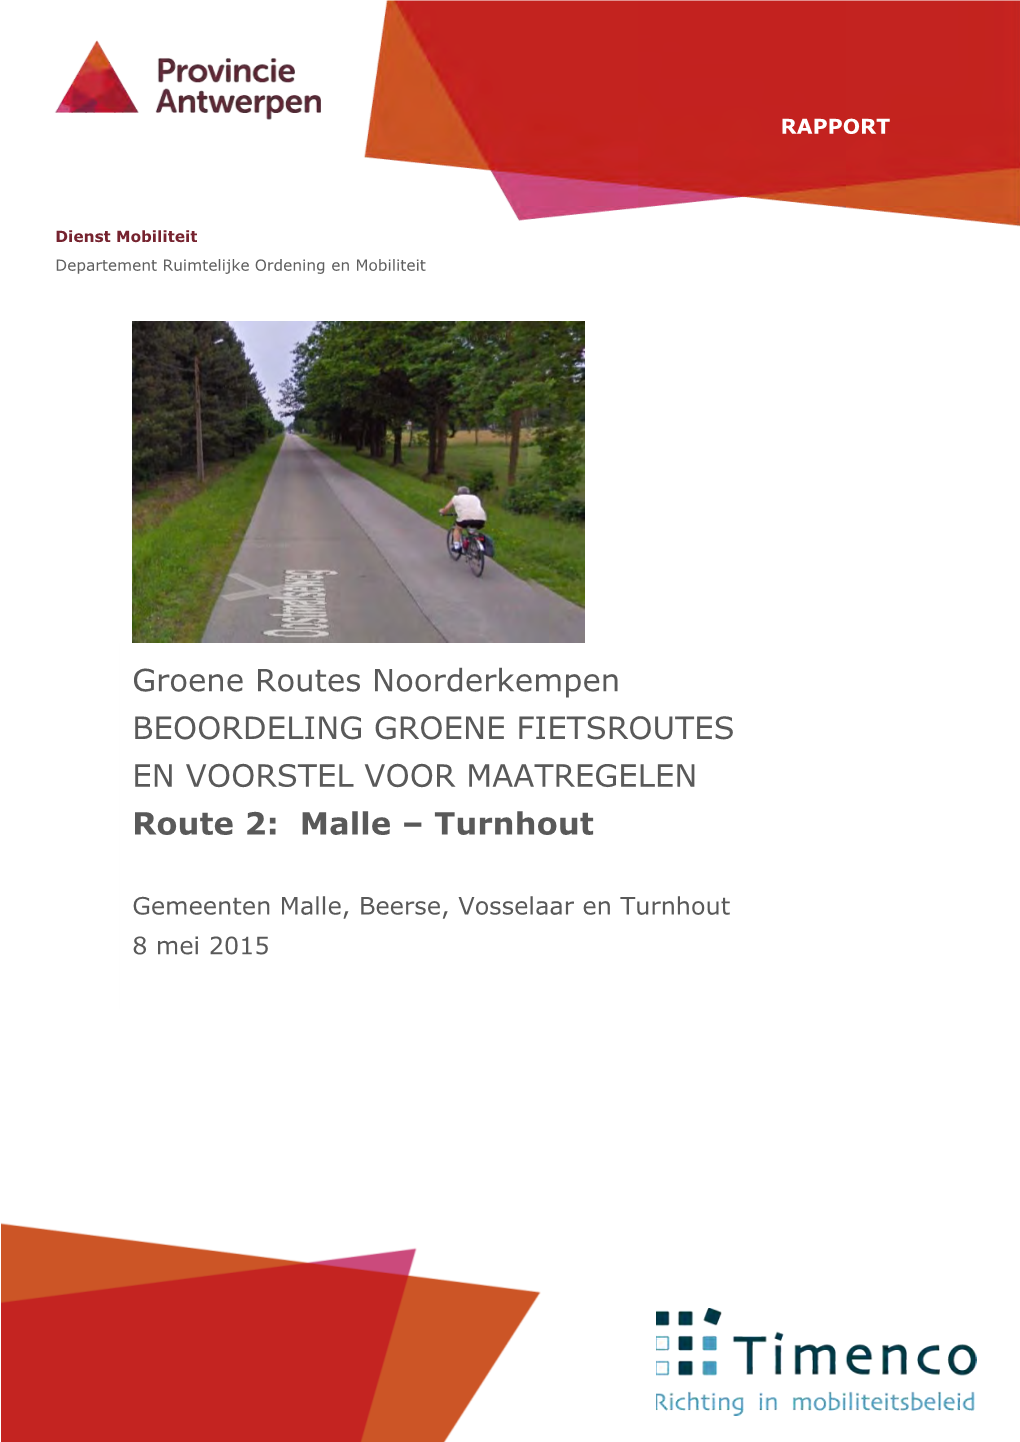 Groene Routes: Route 2 Turnhout